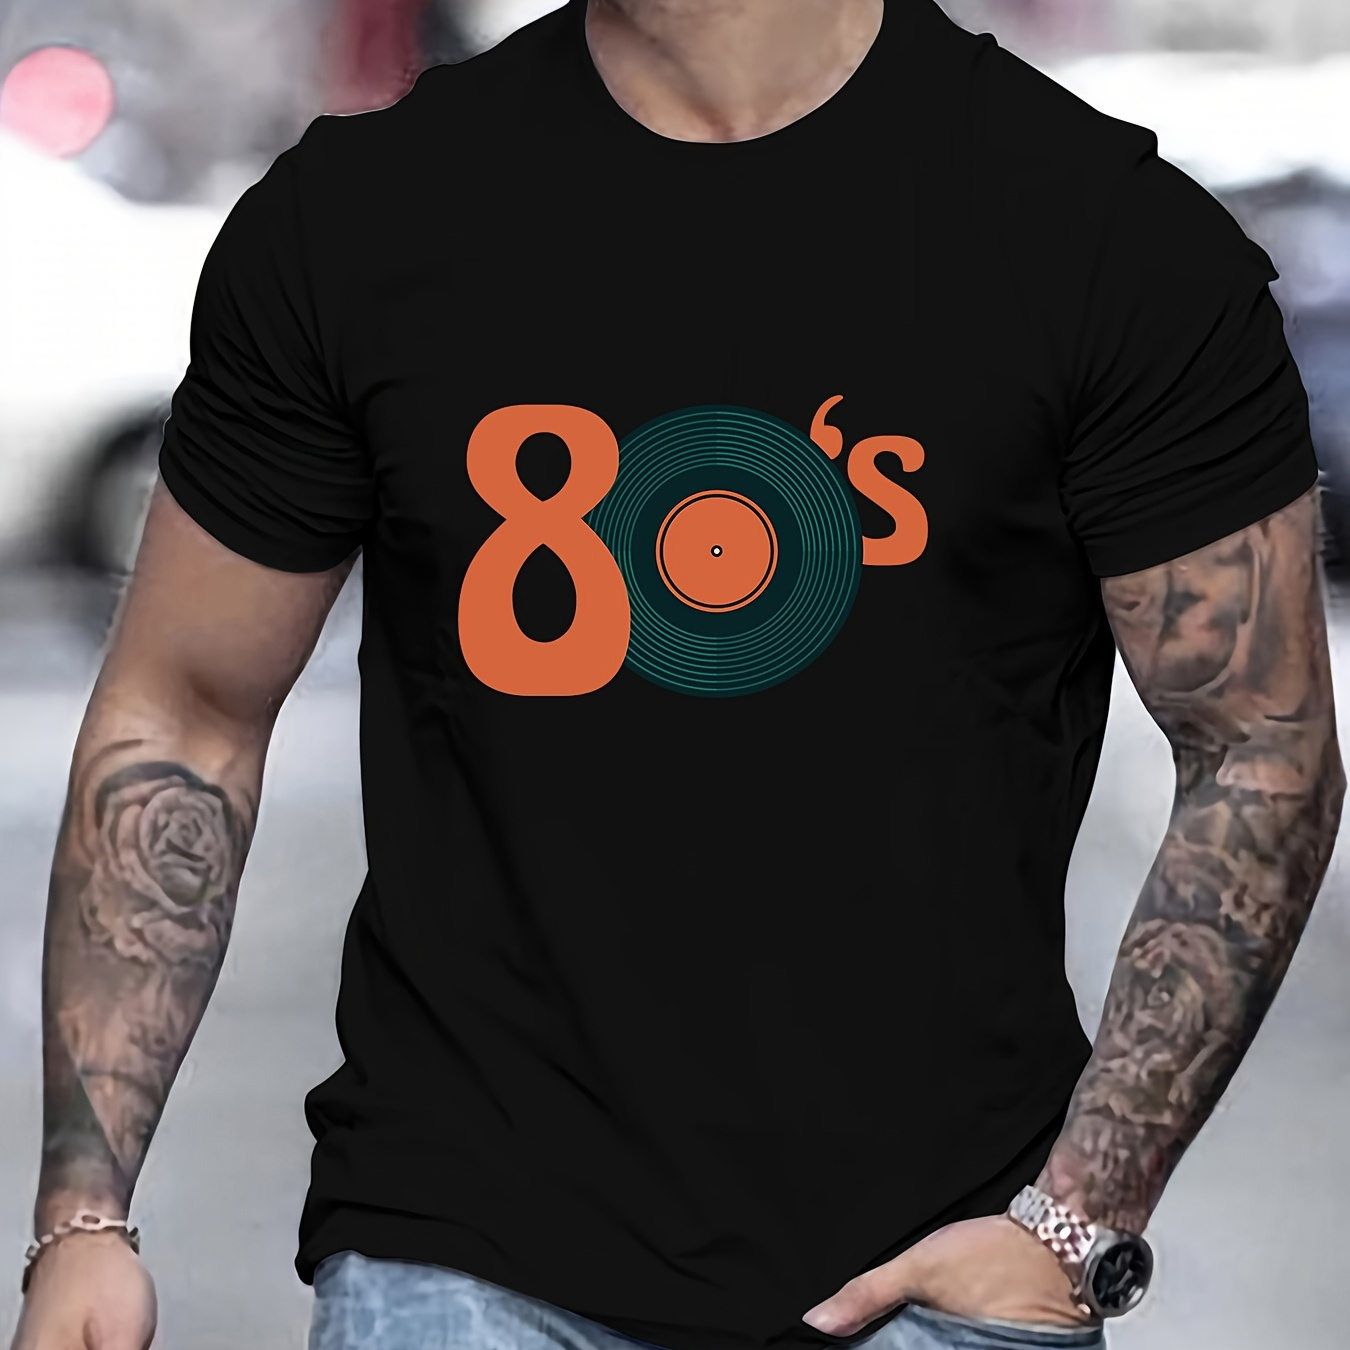 

80's Record Print Short Sleeve Tees For Men, Casual Crew Neck T-shirt, Comfortable Breathable T-shirt